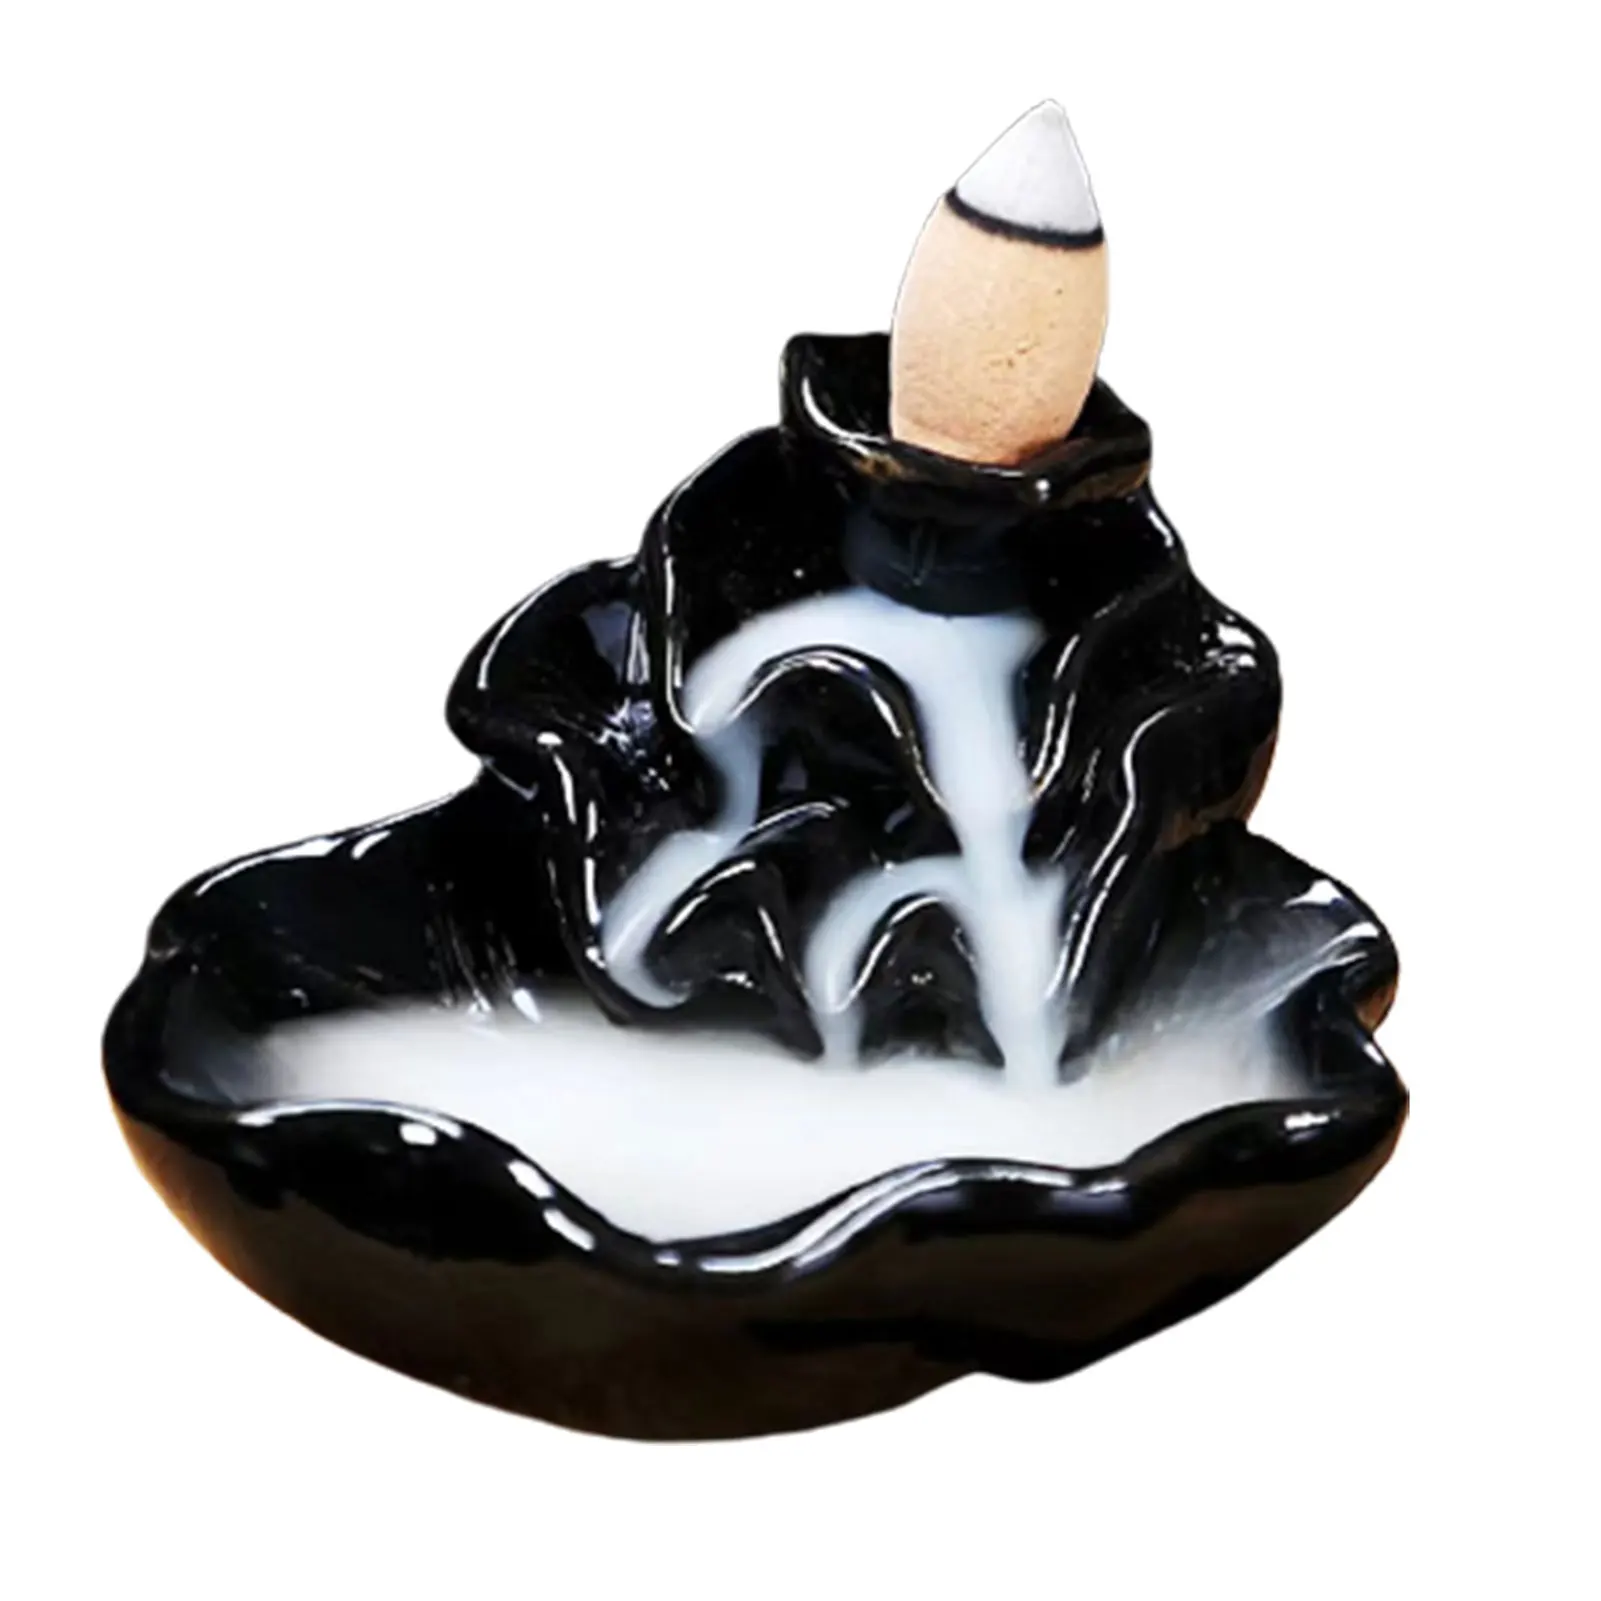 Waterfall Incense Holder Home Decor Cool Aromatherapy Table Incense Fountain for Relaxing or Home Decor images - 6